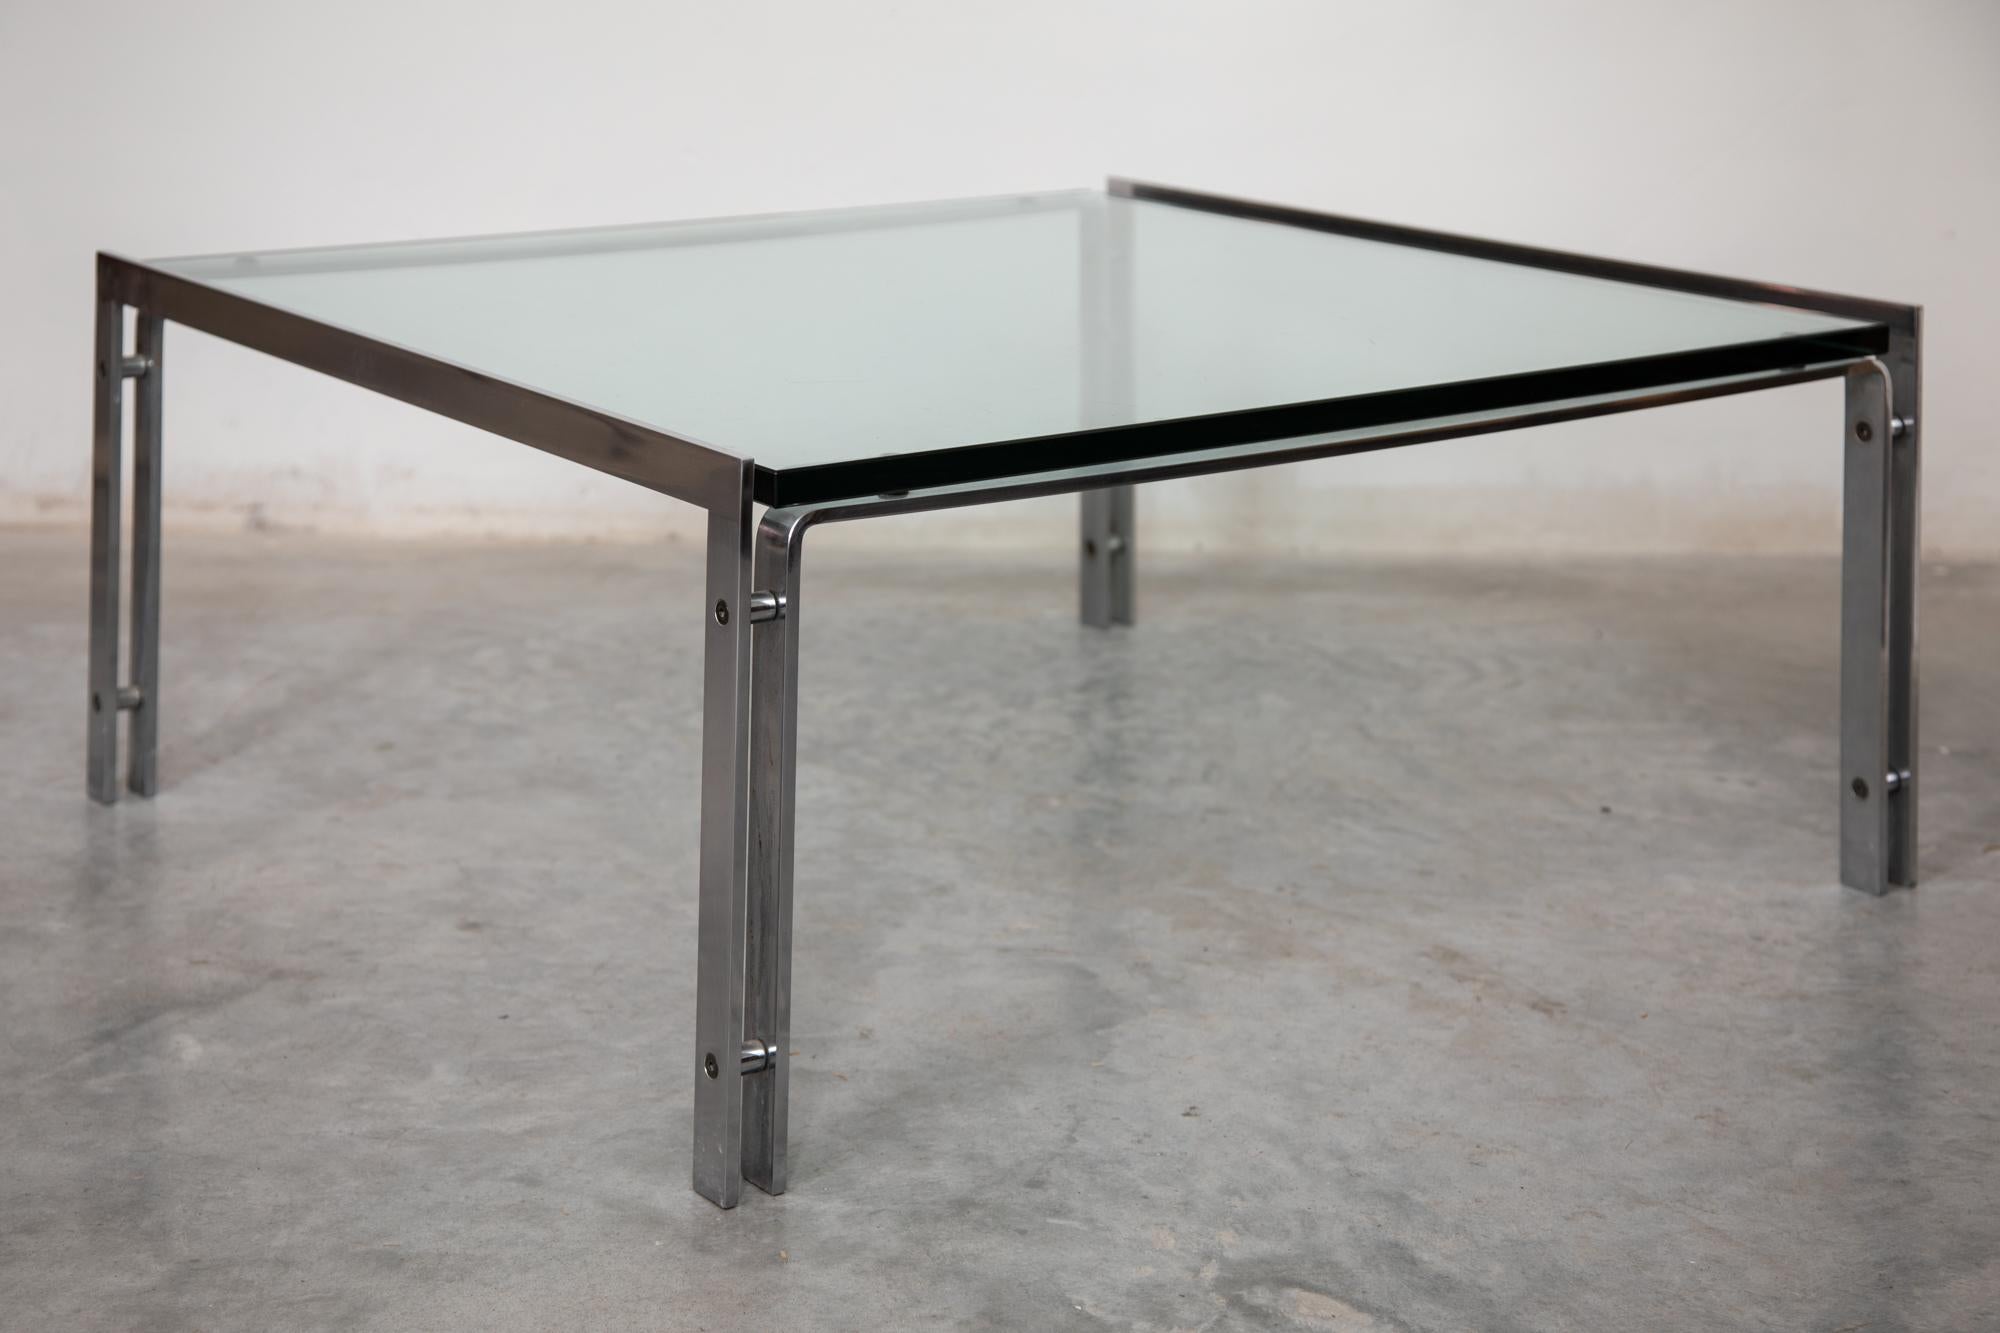 1970s coffee table minimalist modern chrome base with a clear glass top.


